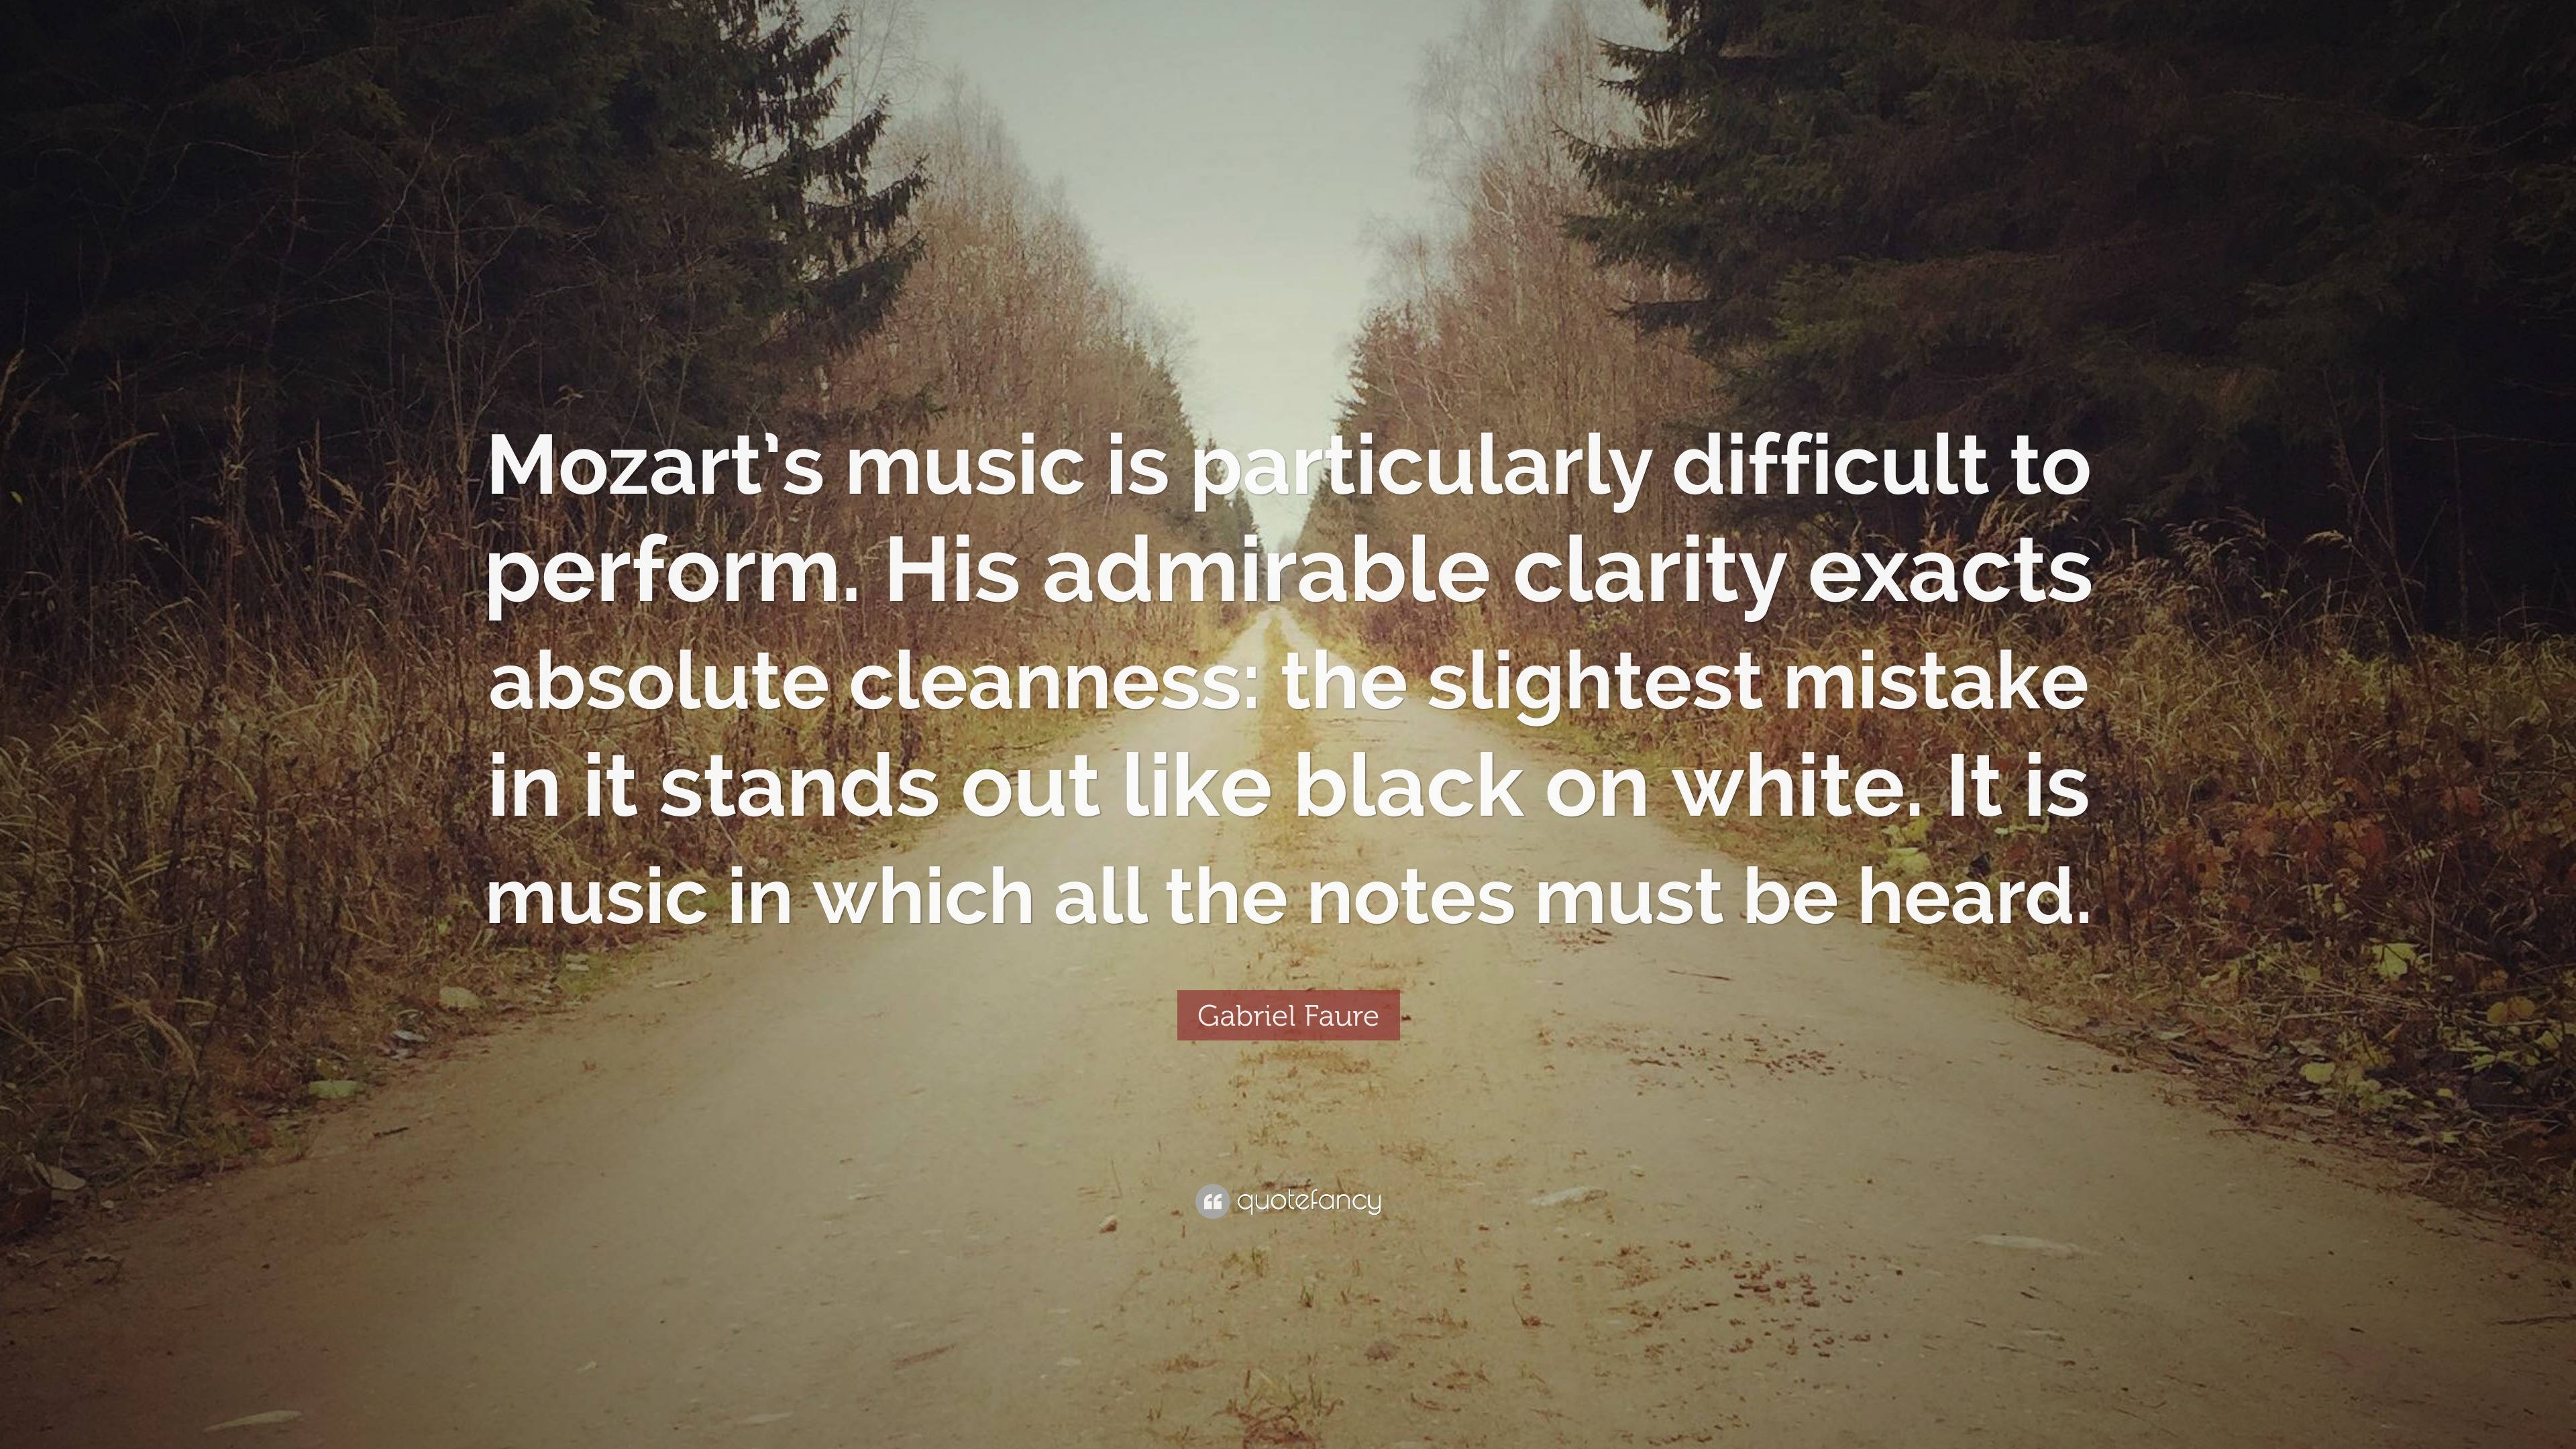 Gabriel Faure Quote: “Mozart’s music is particularly difficult to ...